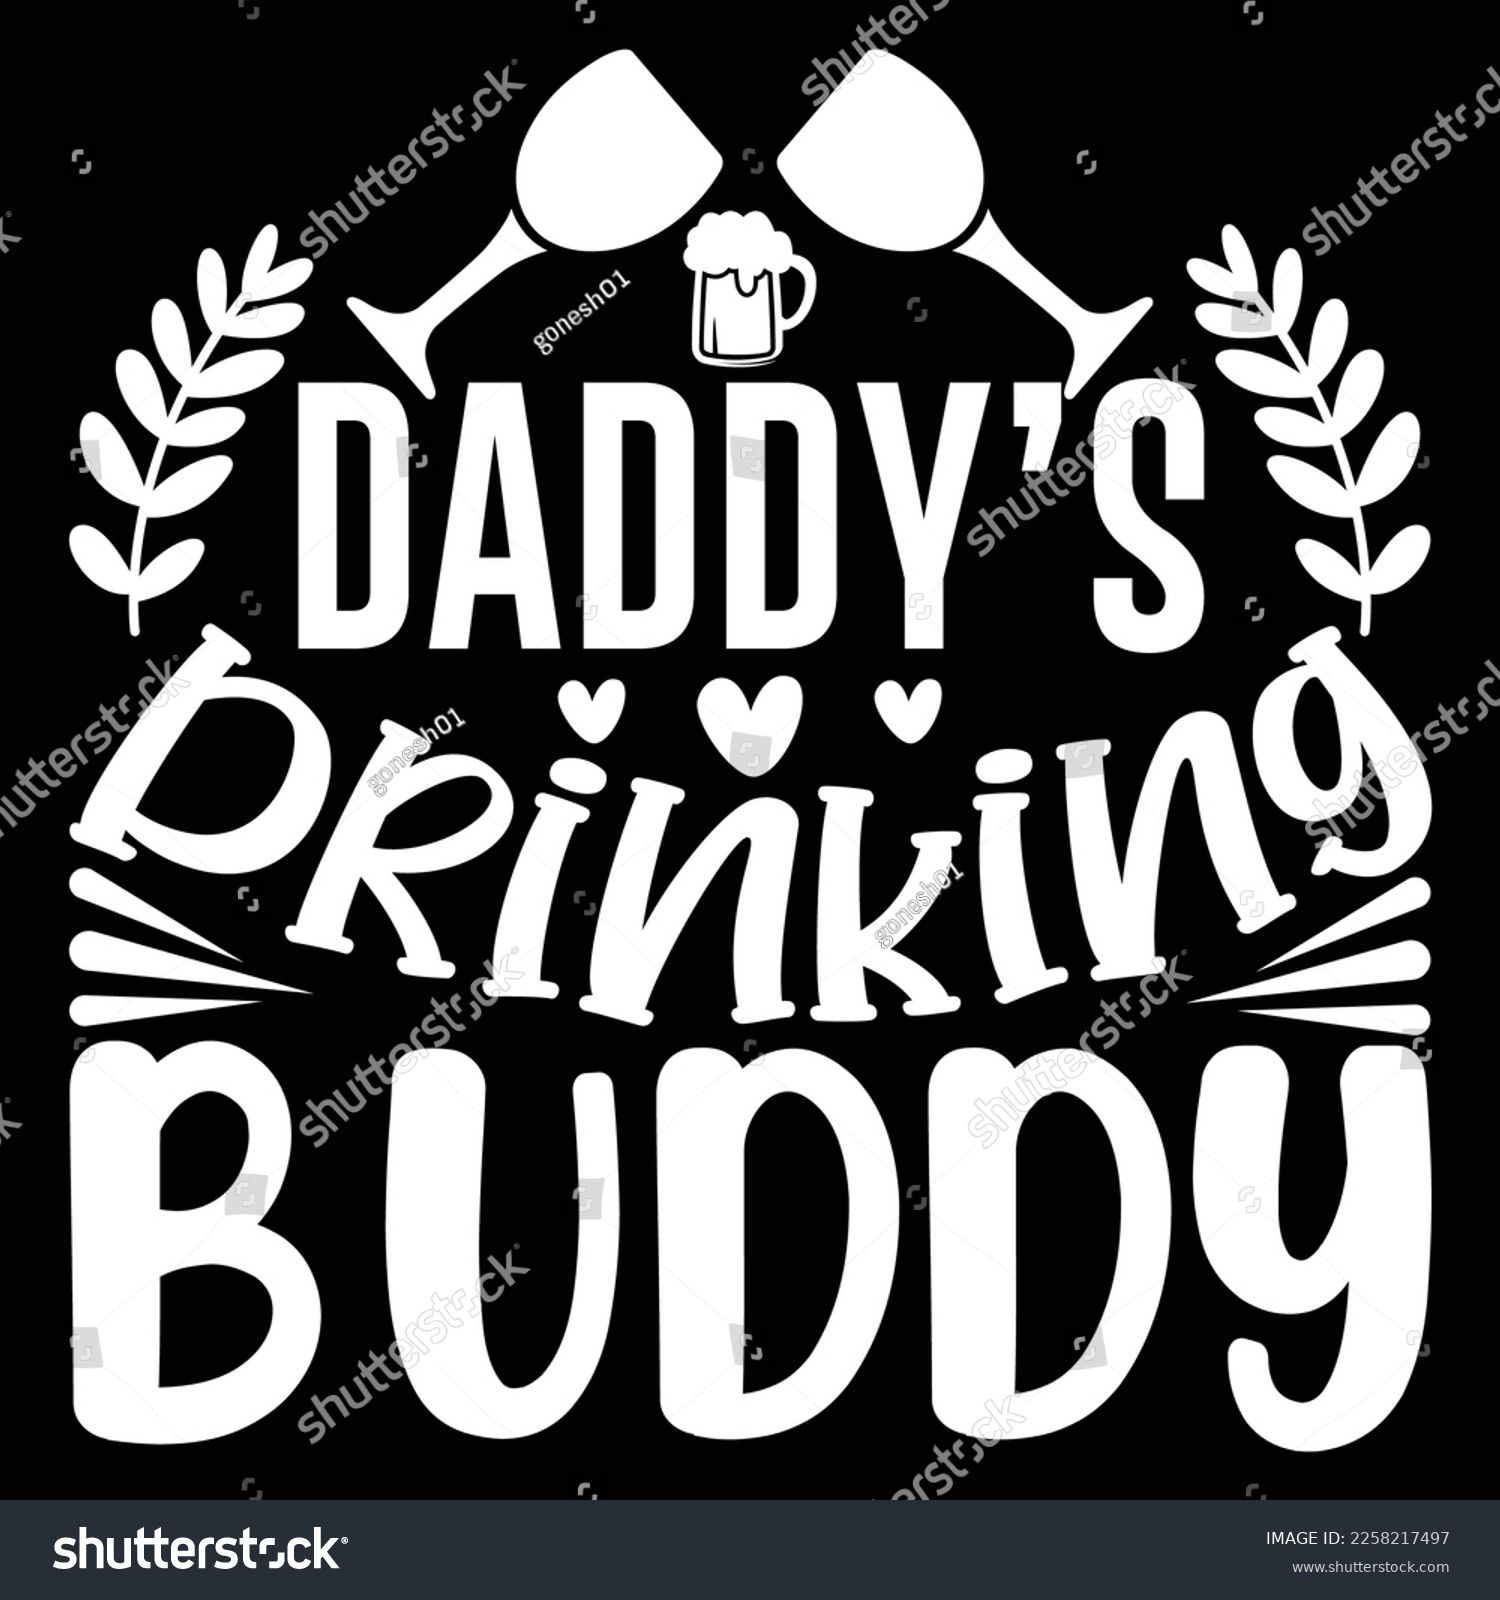 SVG of Daddy’s Drinking Buddy, Funny Baby Clothes, Baby Shower Bundle, Typography Funny Drinking, Happy Father's Day T shirt Design svg